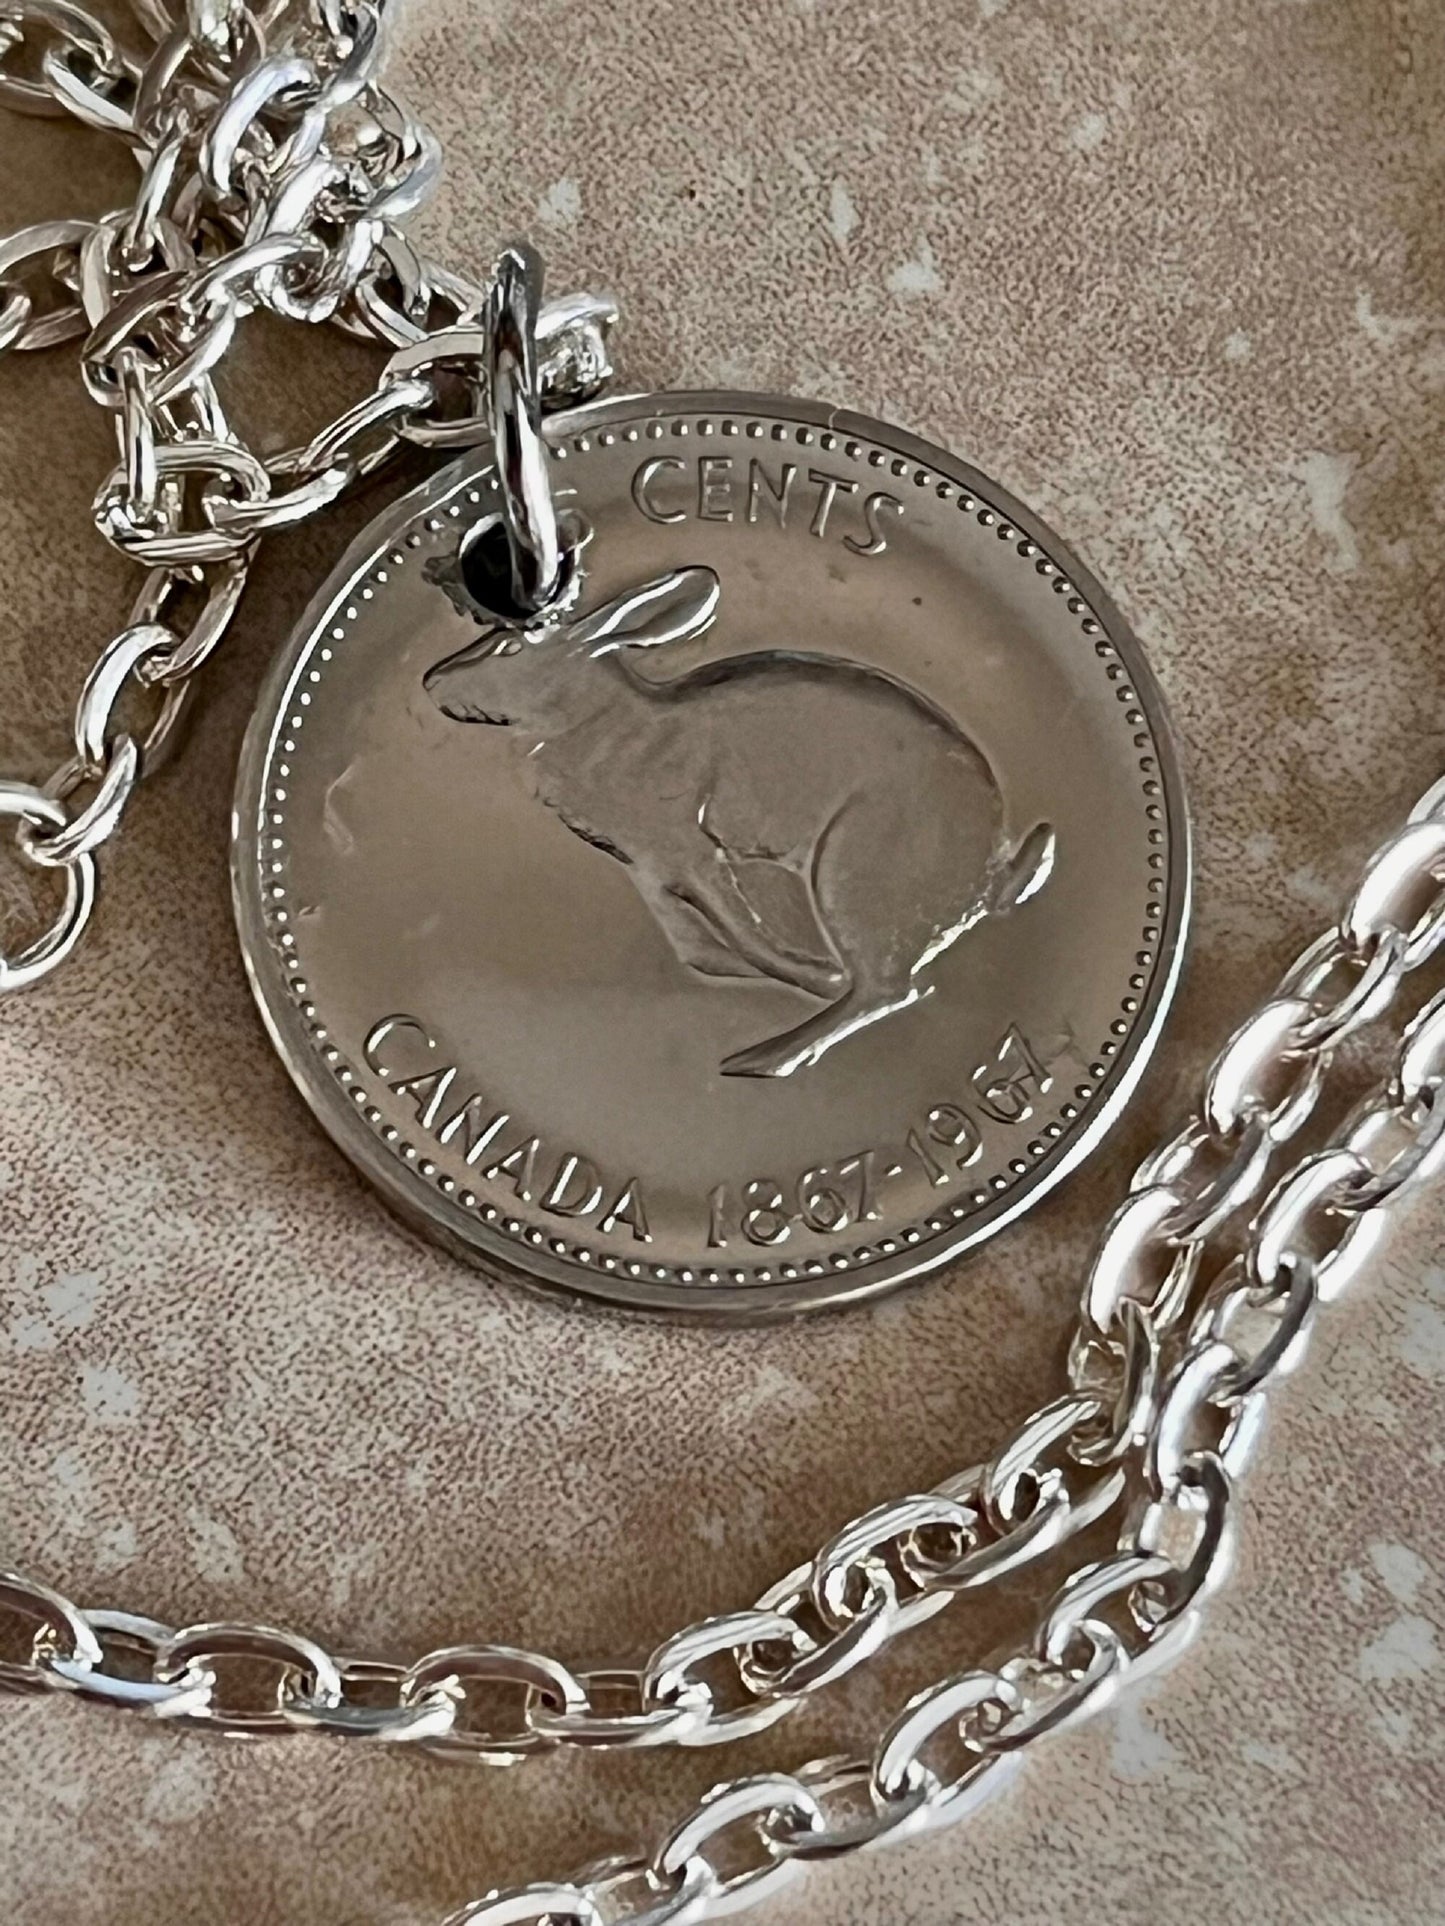 Canada Coin Necklace Rabbit 1967 5 Cents Pendant Centennial Nickel Personal Jewelry Gift Friend Charm For Him Her World Coin Collector